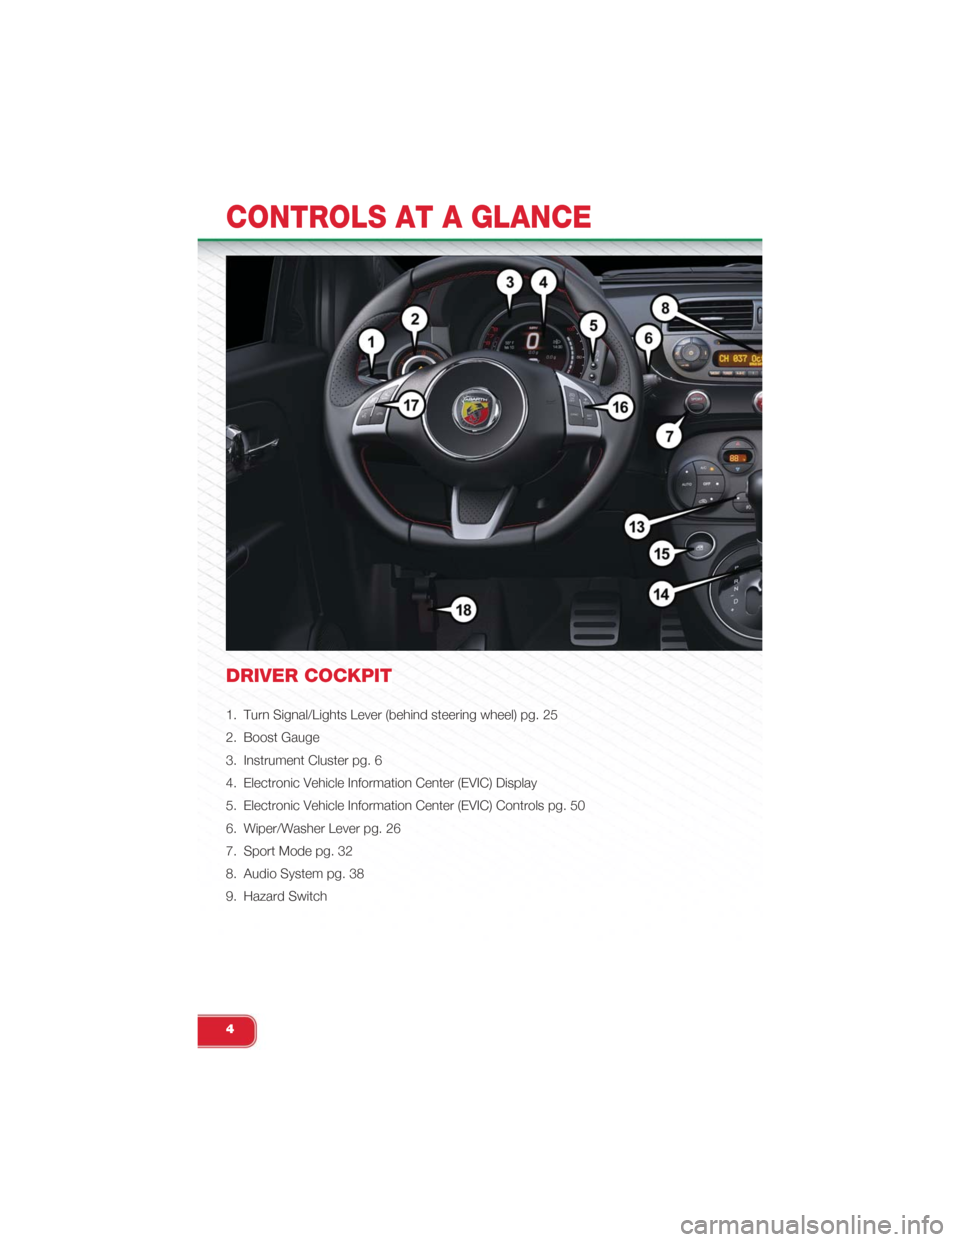 FIAT 500 ABARTH 2015 2.G User Guide DRIVER COCKPIT
1. Turn Signal/Lights Lever (behind steering wheel) pg. 25
2. Boost Gauge
3. Instrument Cluster pg. 6
4. Electronic Vehicle Information Center (EVIC) Display
5. Electronic Vehicle Infor